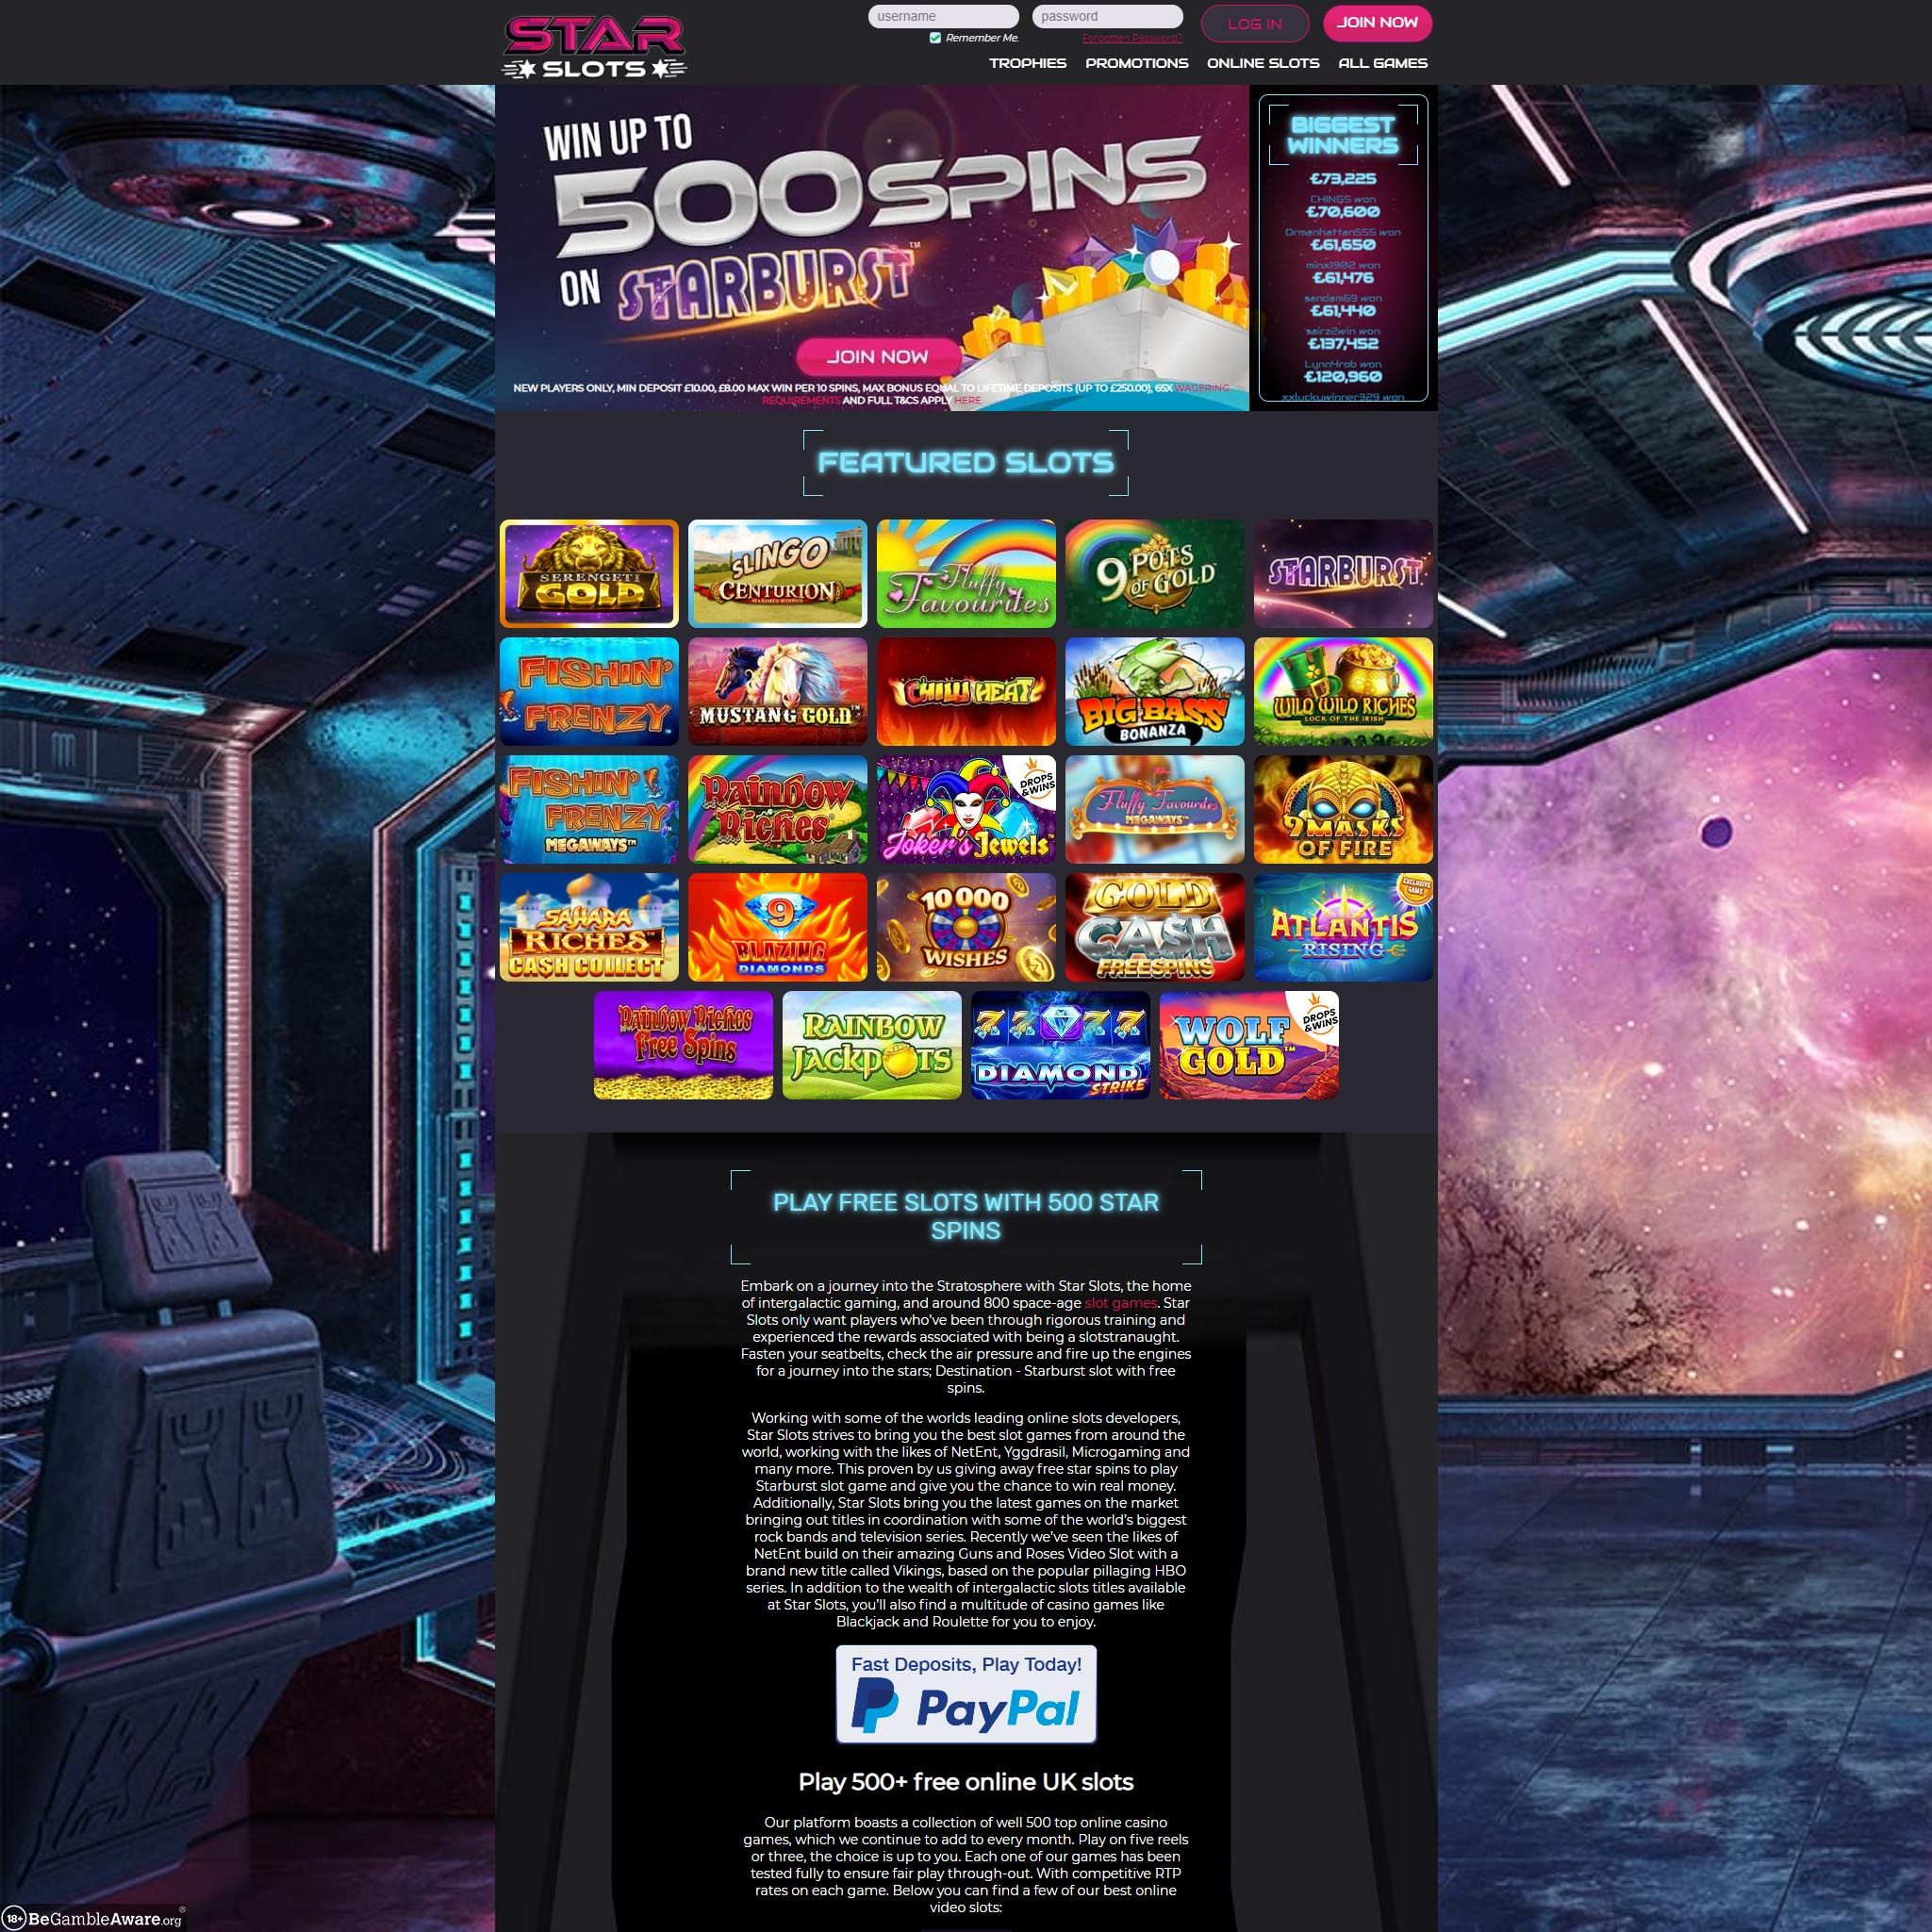 Star Slots review by Mr. Gamble